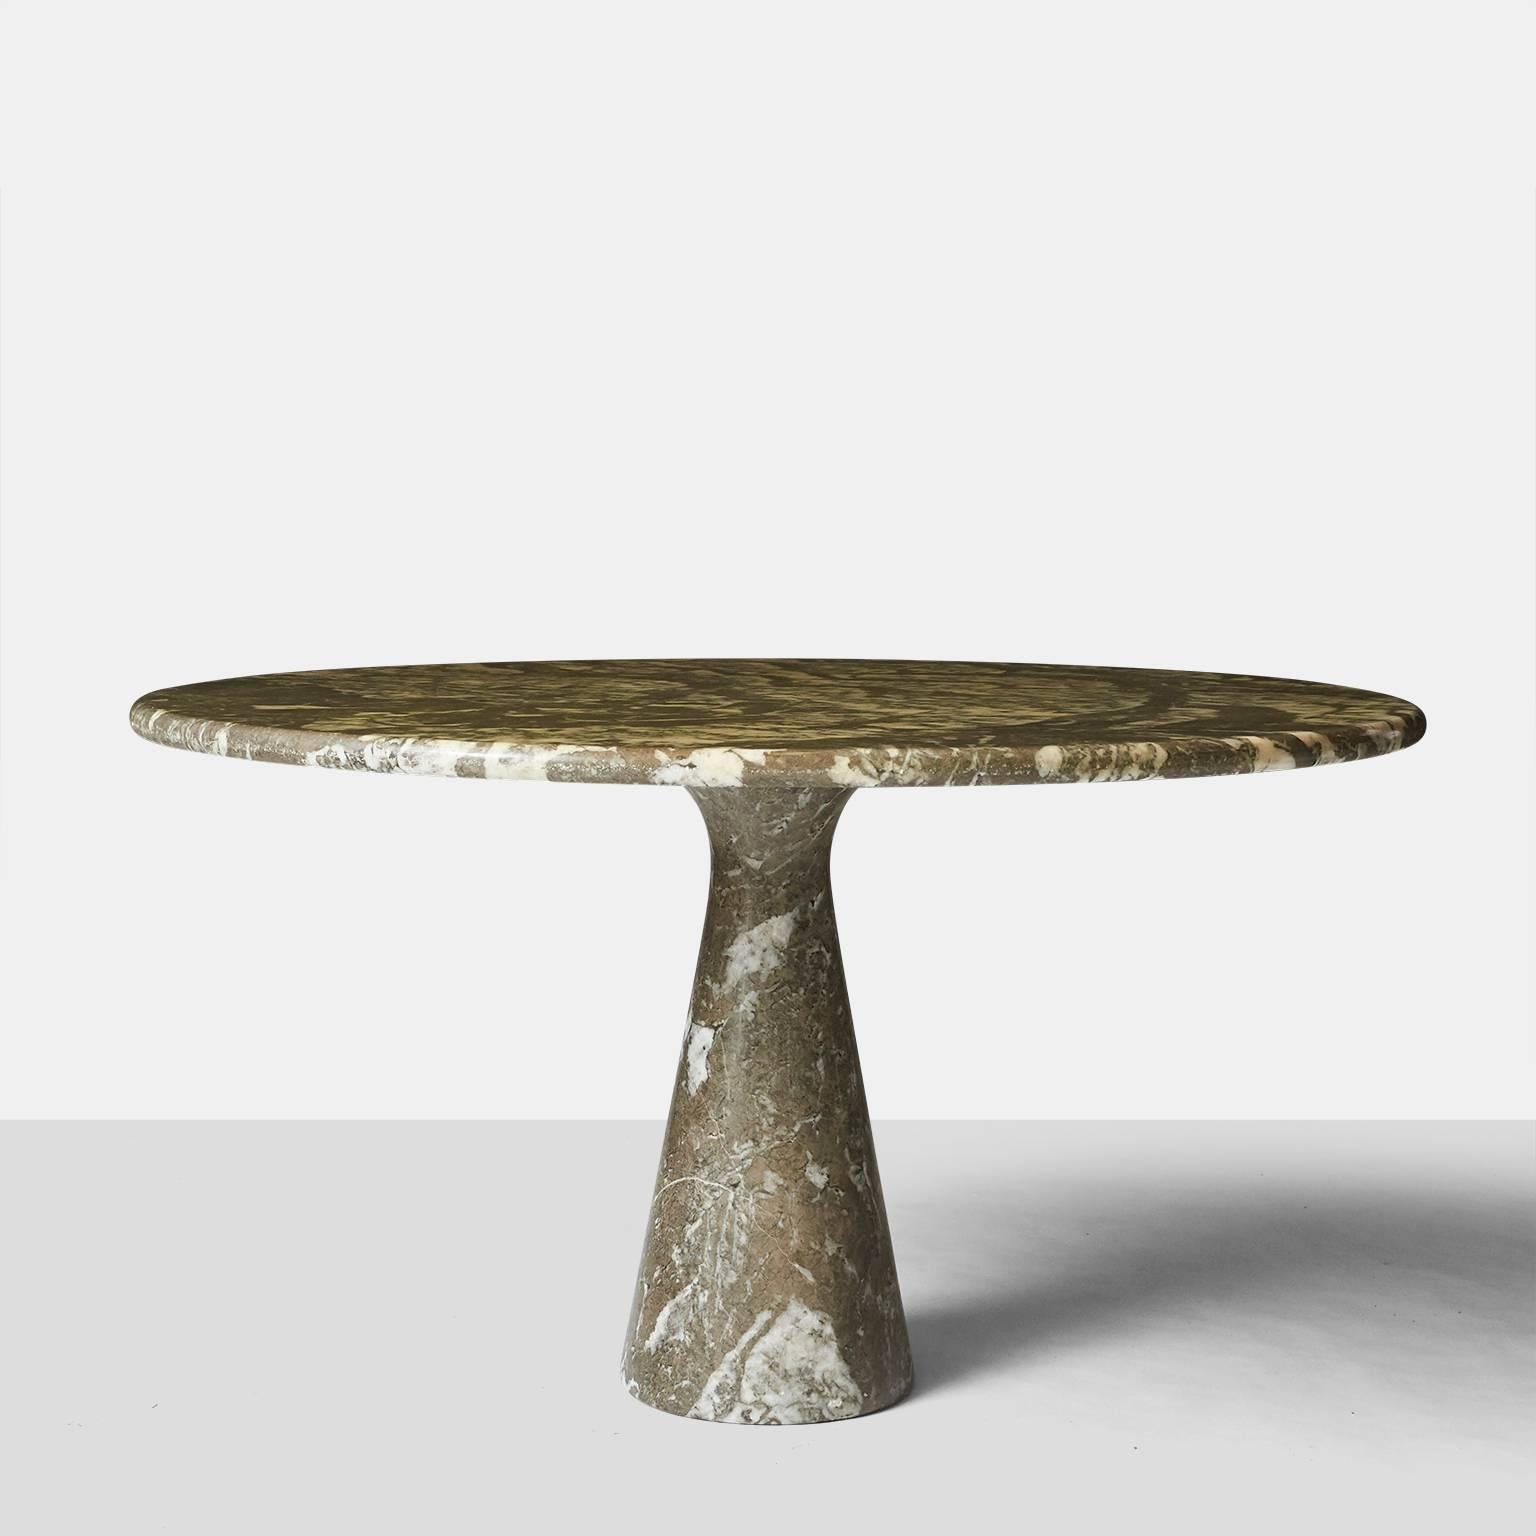 A dining or center table in gray marble by Angelo Mangiarotti. This Eros collection table with a rounded edge was made in Italy, circa 1975.